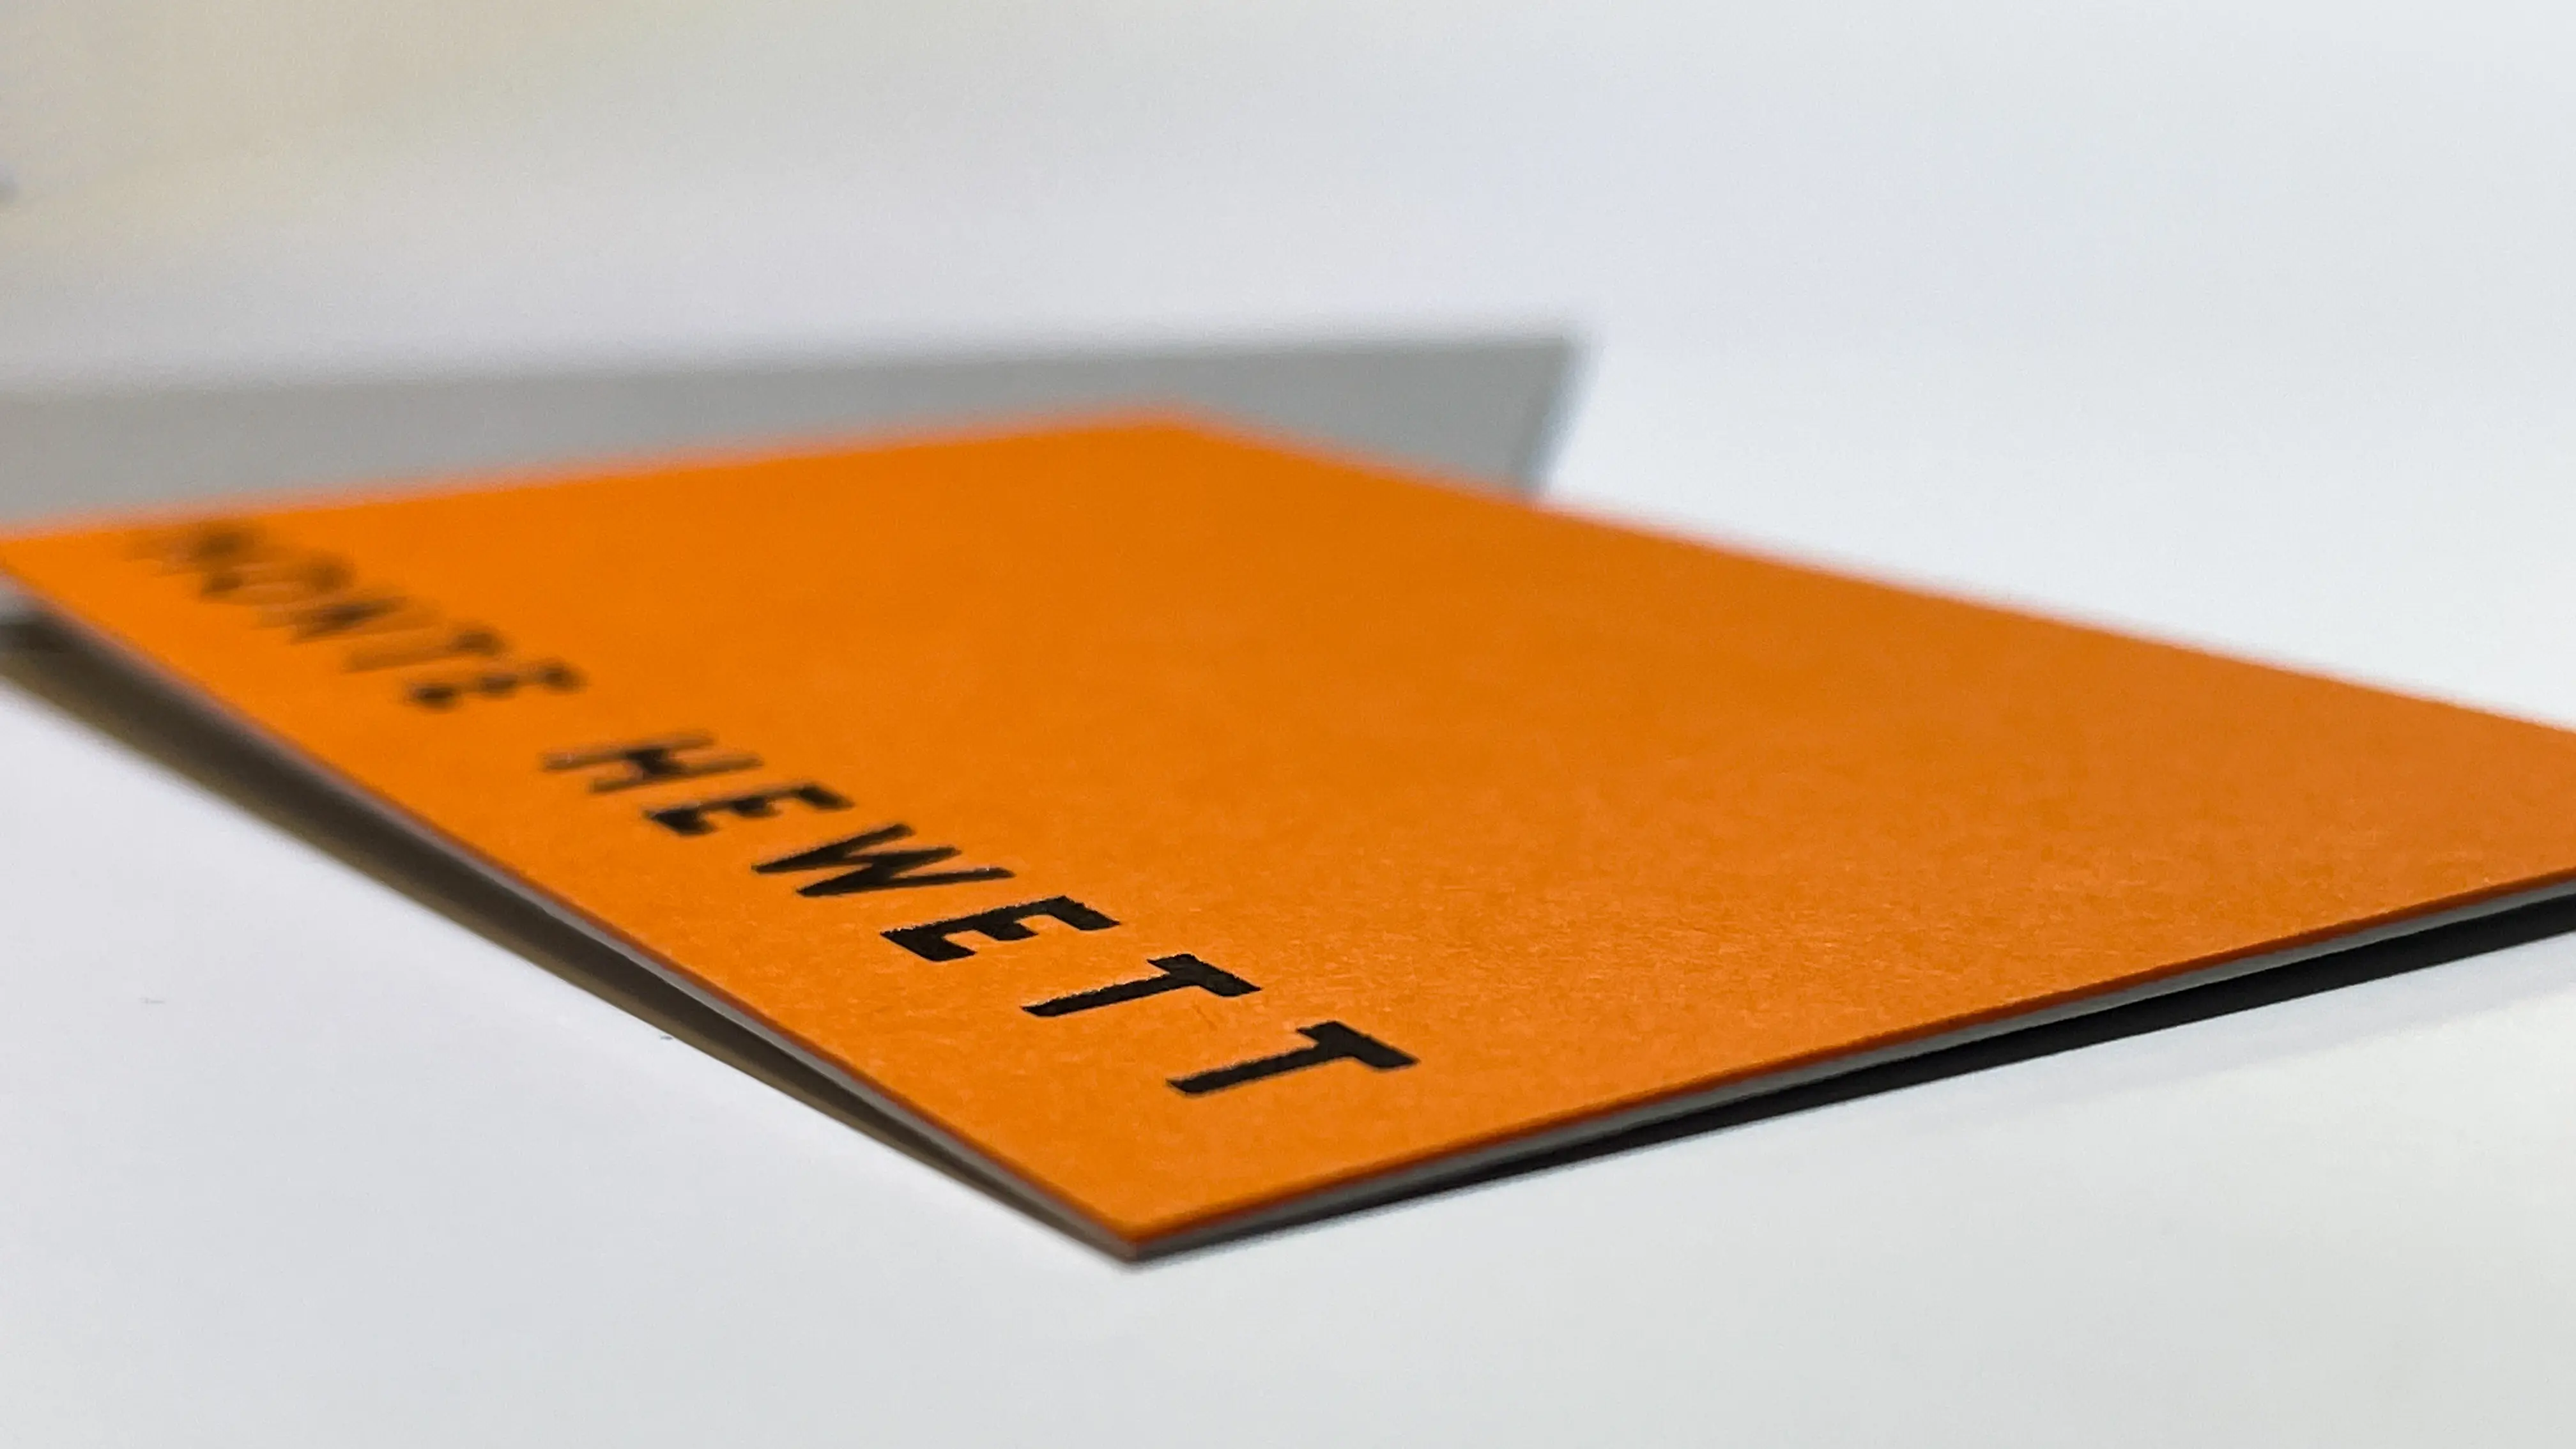 An image of a bright orange business card.